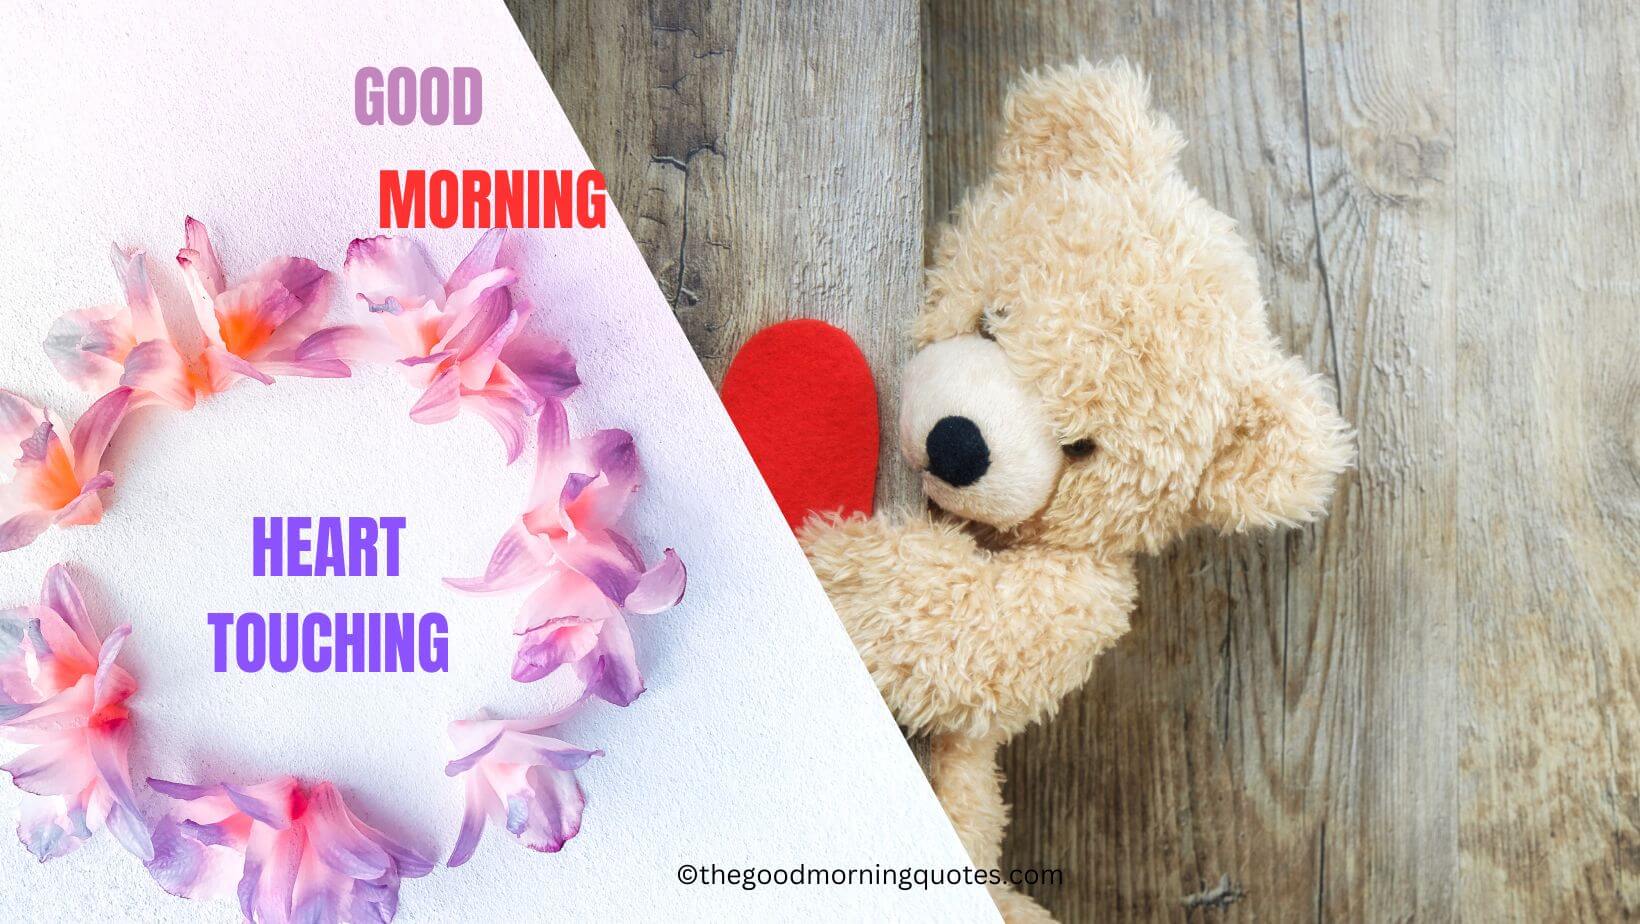 Good Morning Heart Touching Quotes in Hindi